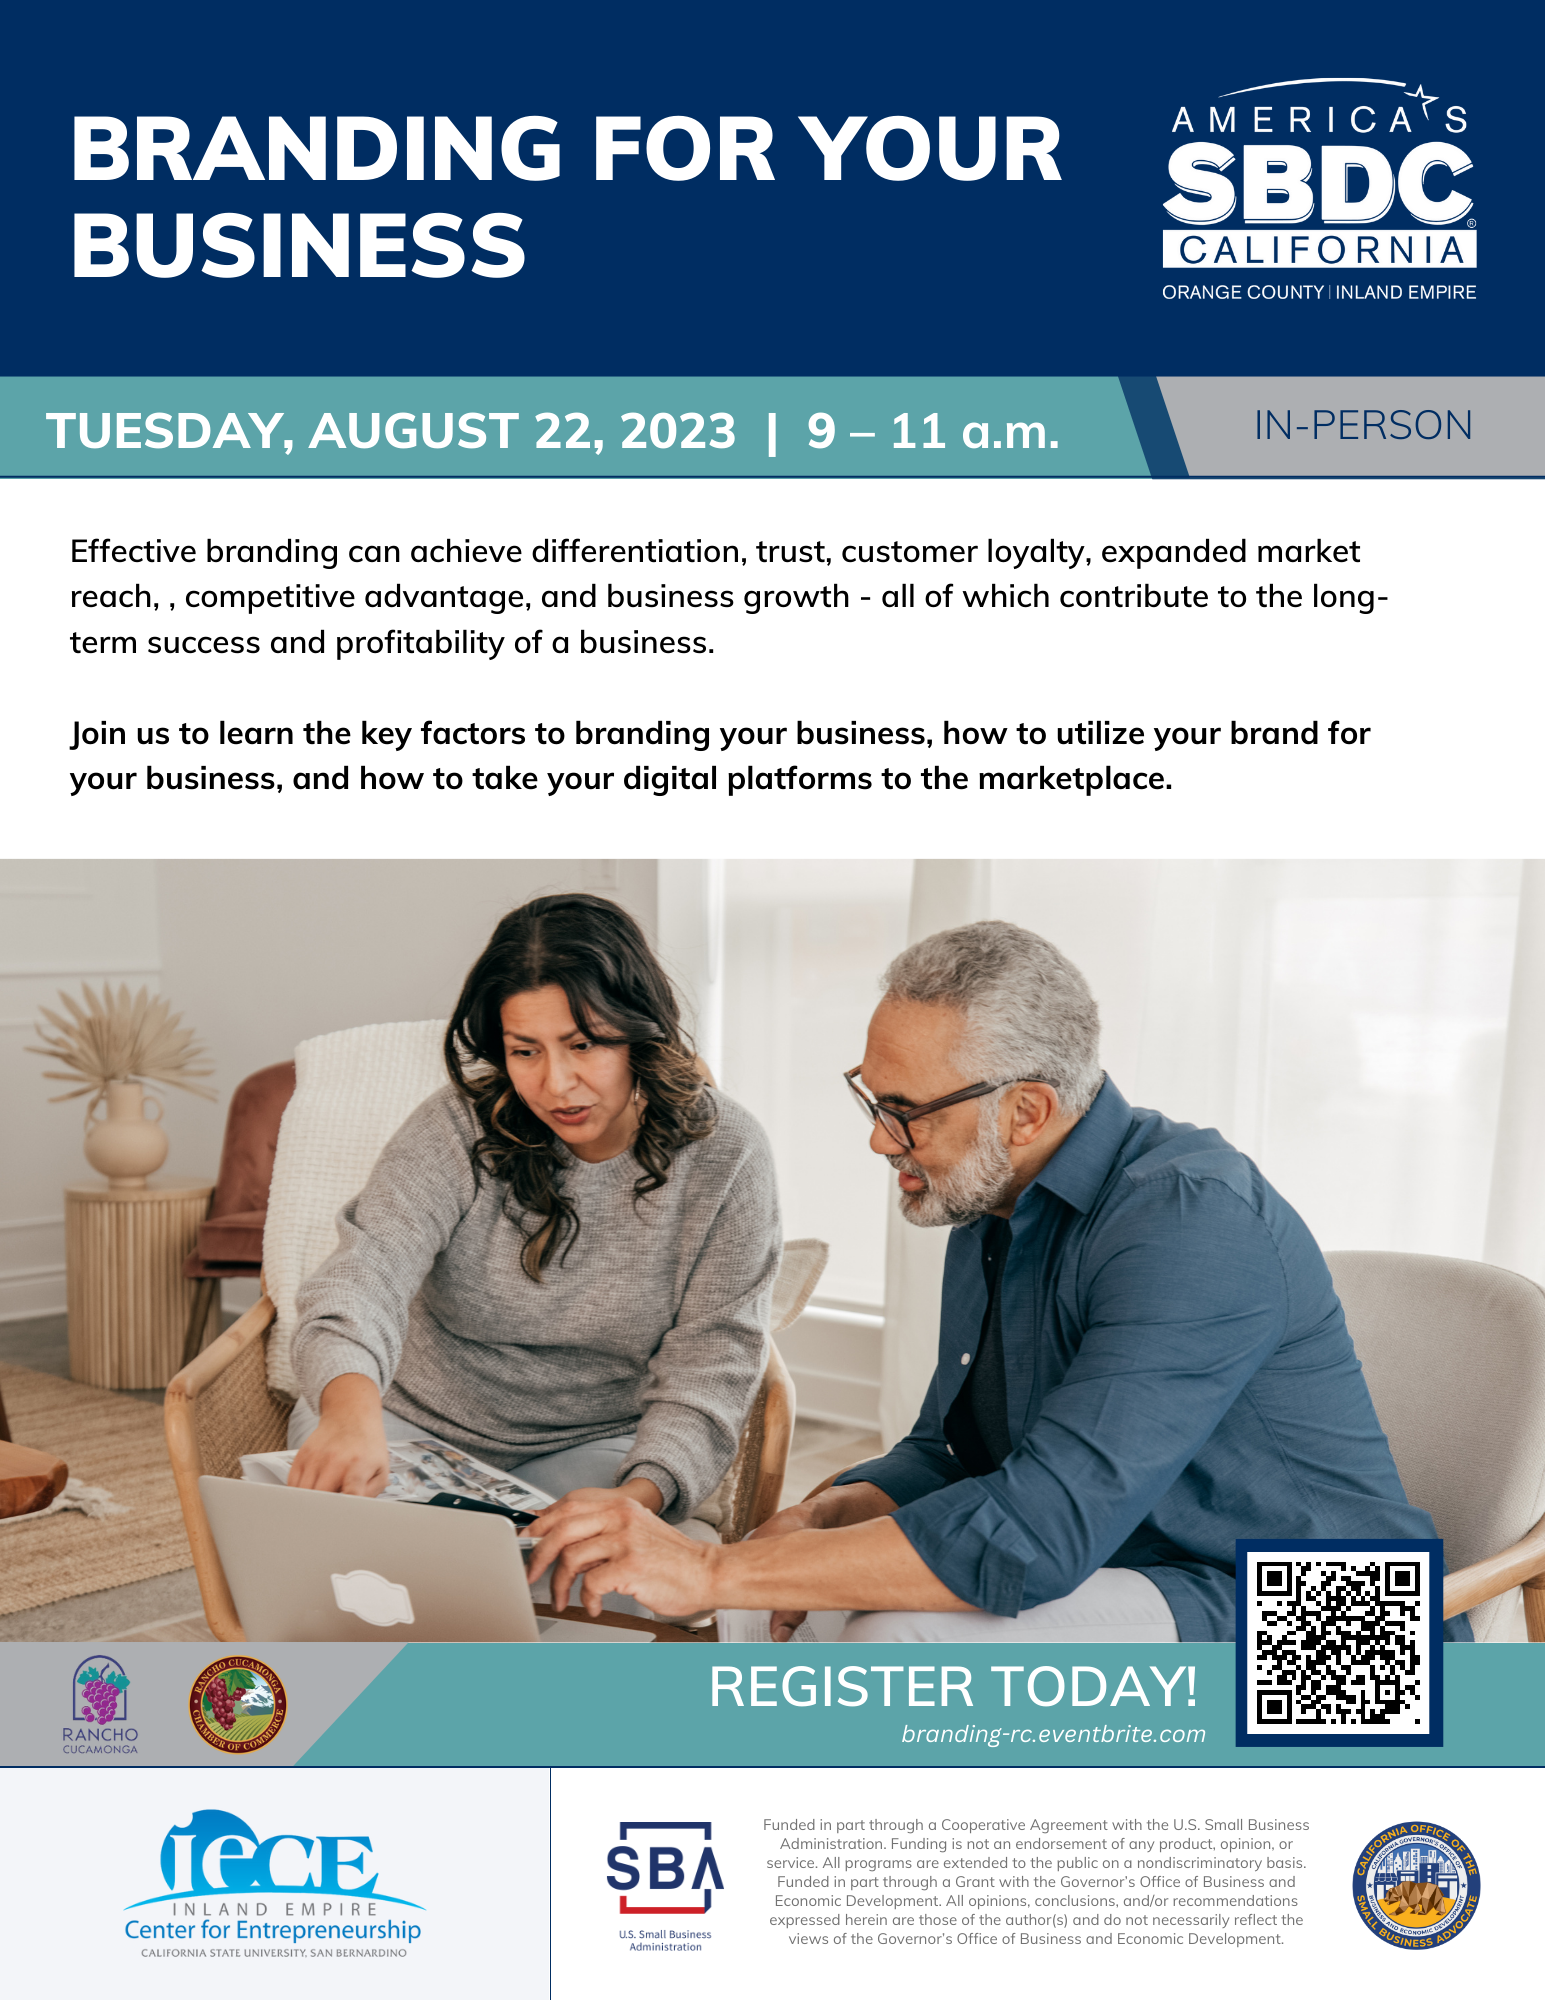 randing for your Business Workshop 8.22